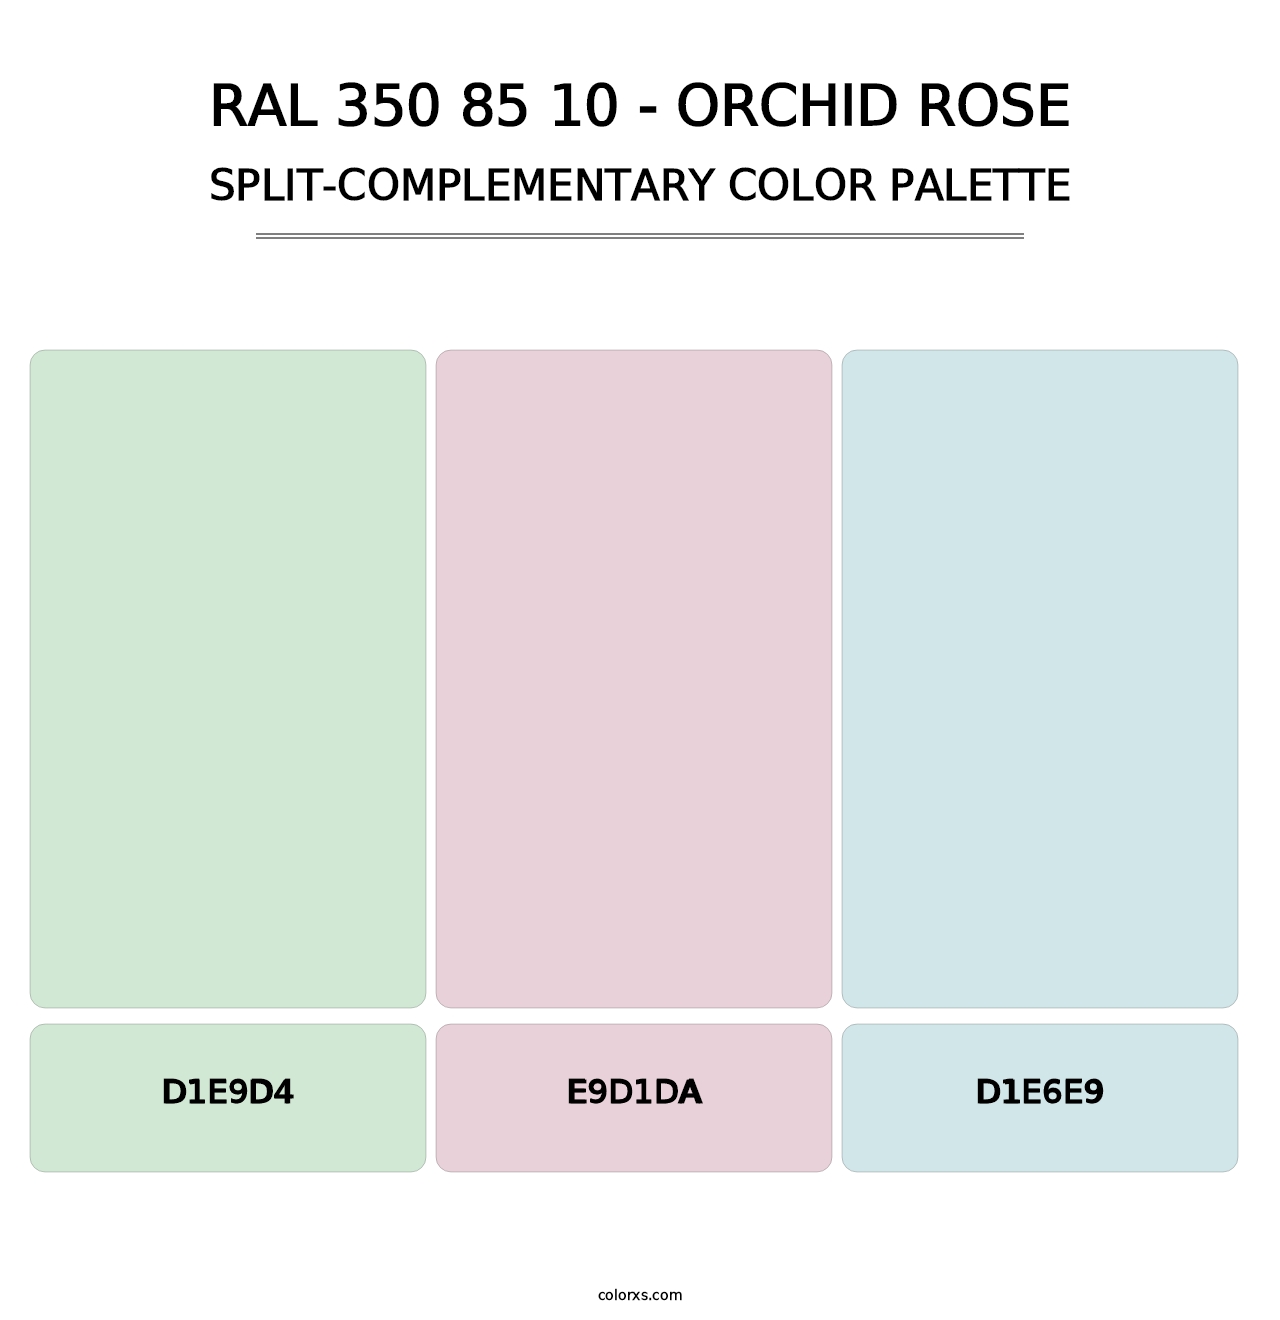 RAL 350 85 10 - Orchid Rose - Split-Complementary Color Palette